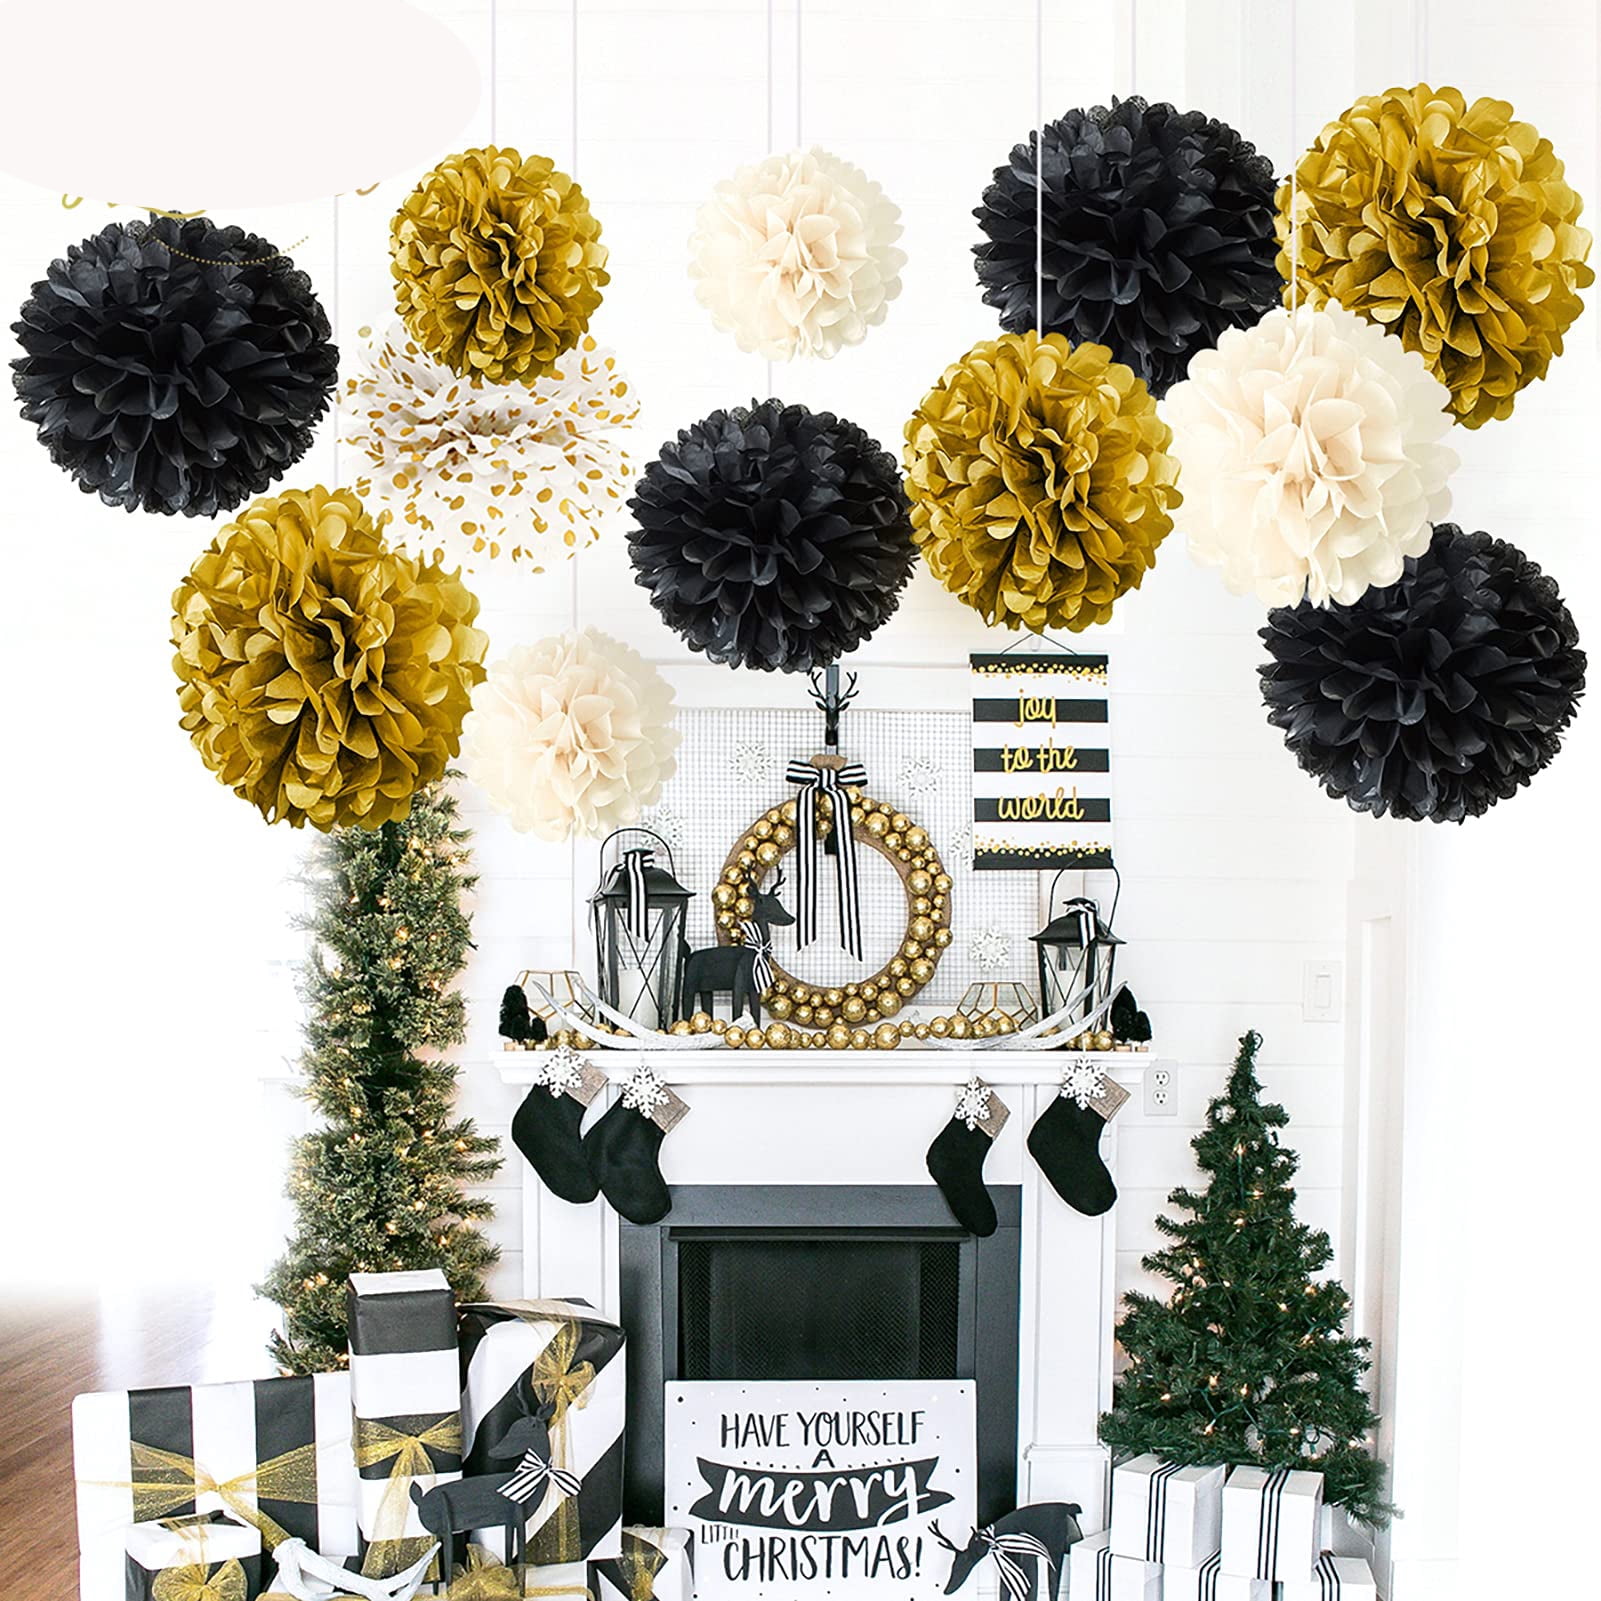 Black and Gold Party Decorations - DIY Tissue Paper Pom Poms Flowers,  Tassel, Balloons, Hanging Swirl, Paper Circle Garland for Graduation and